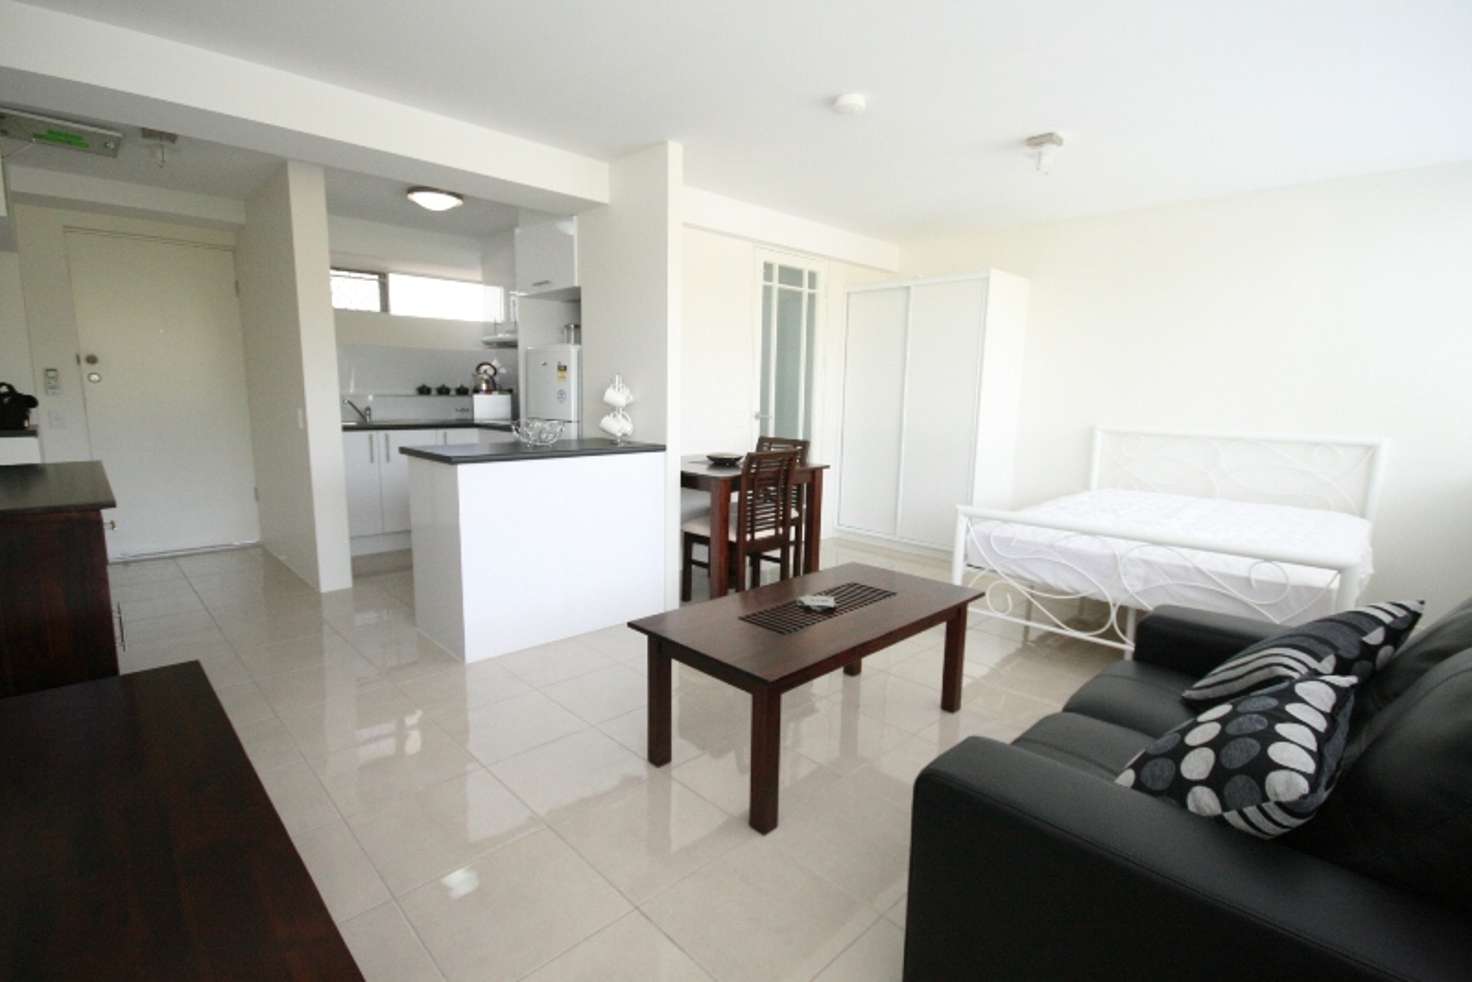 Main view of Homely apartment listing, 554 Main Street, Kangaroo Point QLD 4169